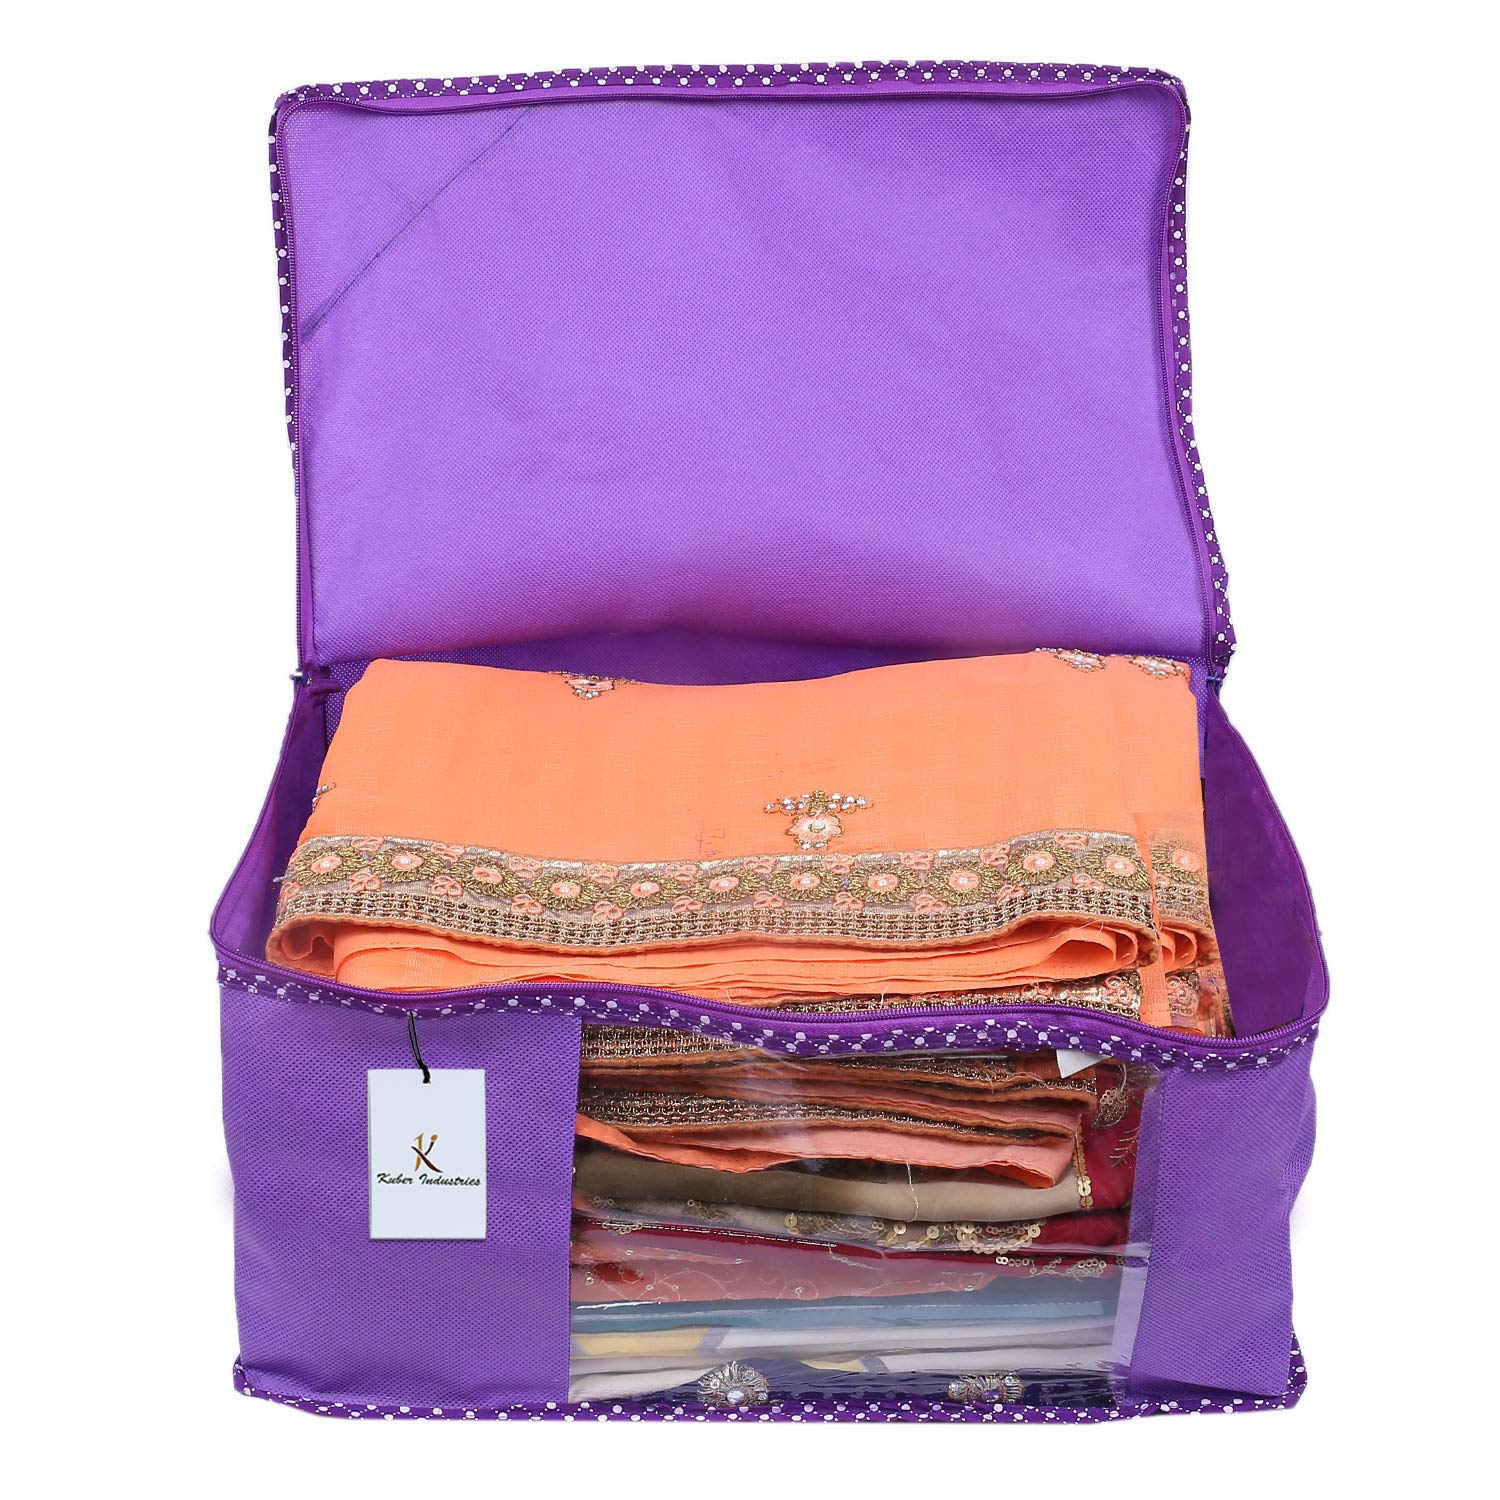 Kuber Industries 12 Piece Non Woven Saree Cover Set, Royal Blue,Large Size -CTKTC6452